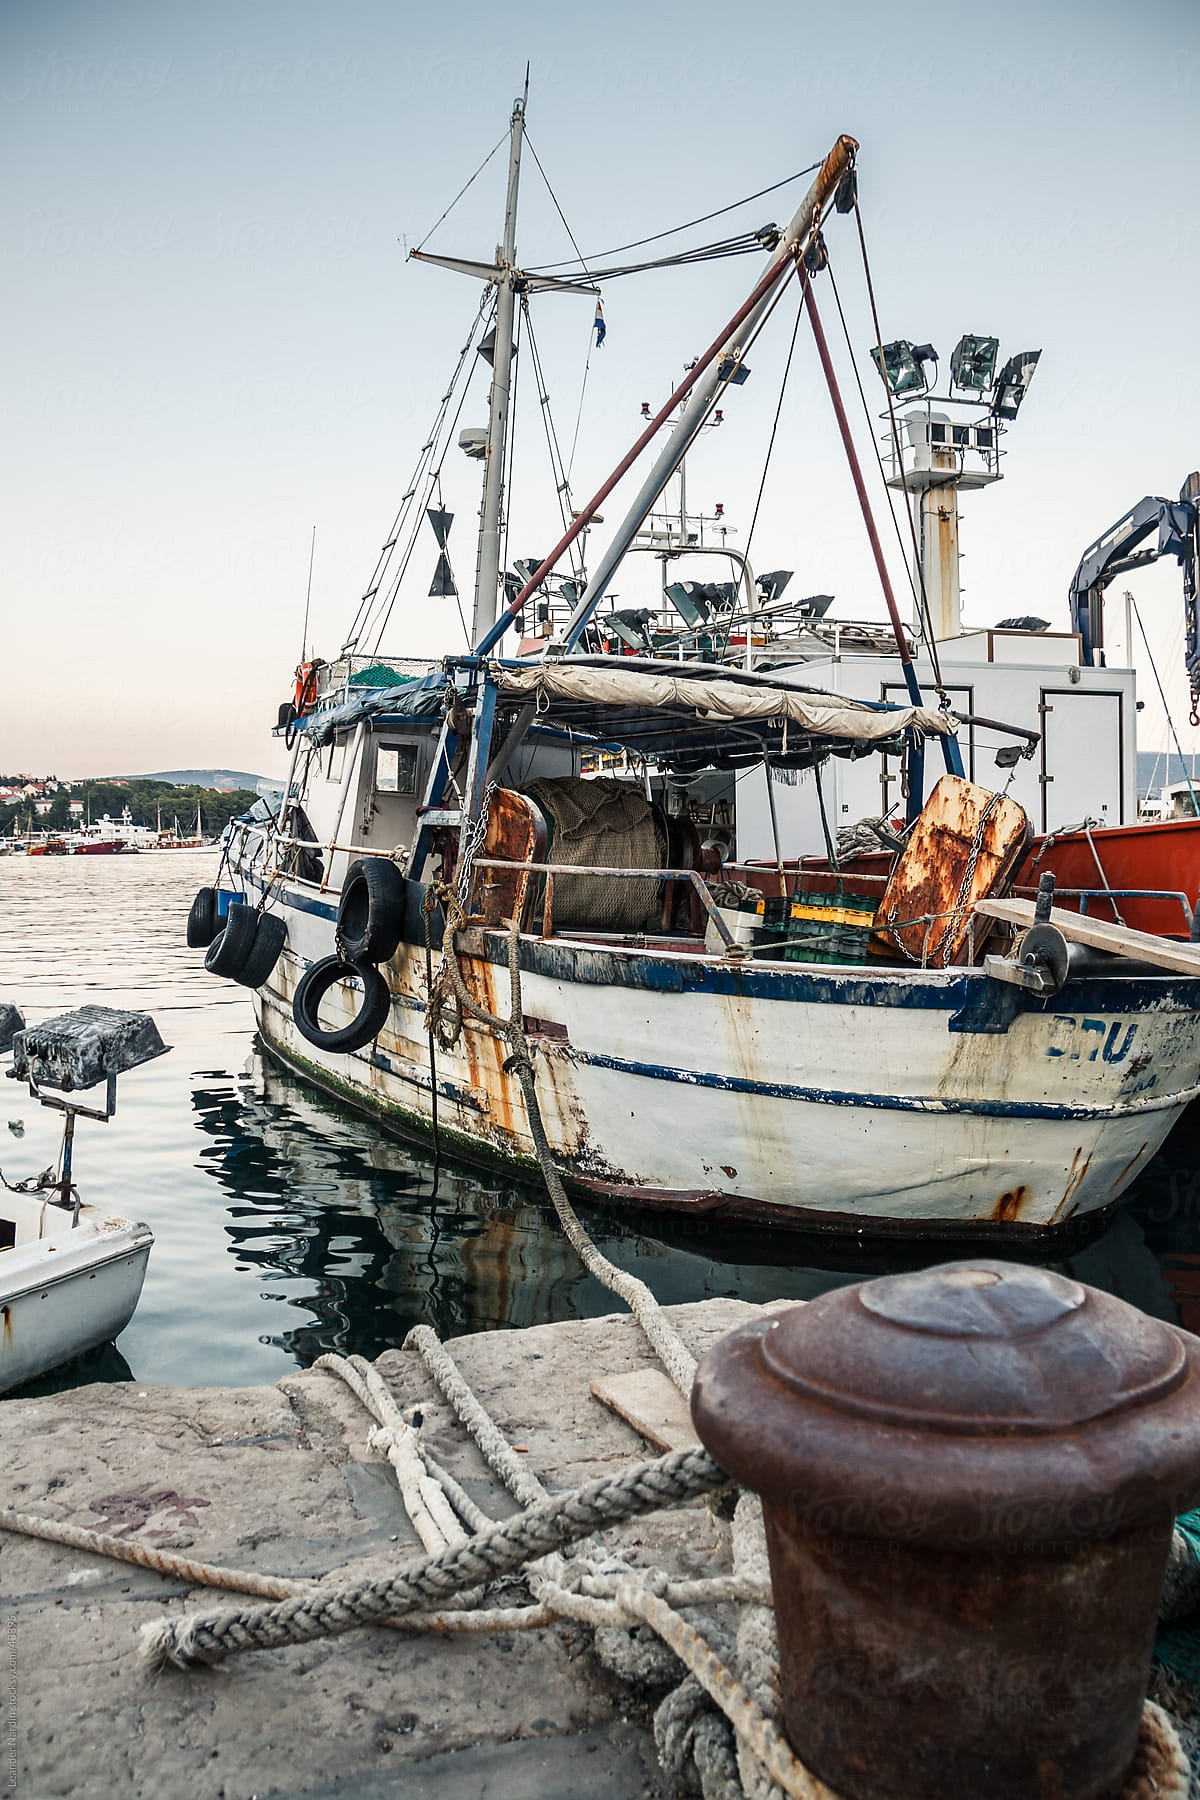 Old Dirty Fishing Boat In The Harbour by Stocksy Contributor